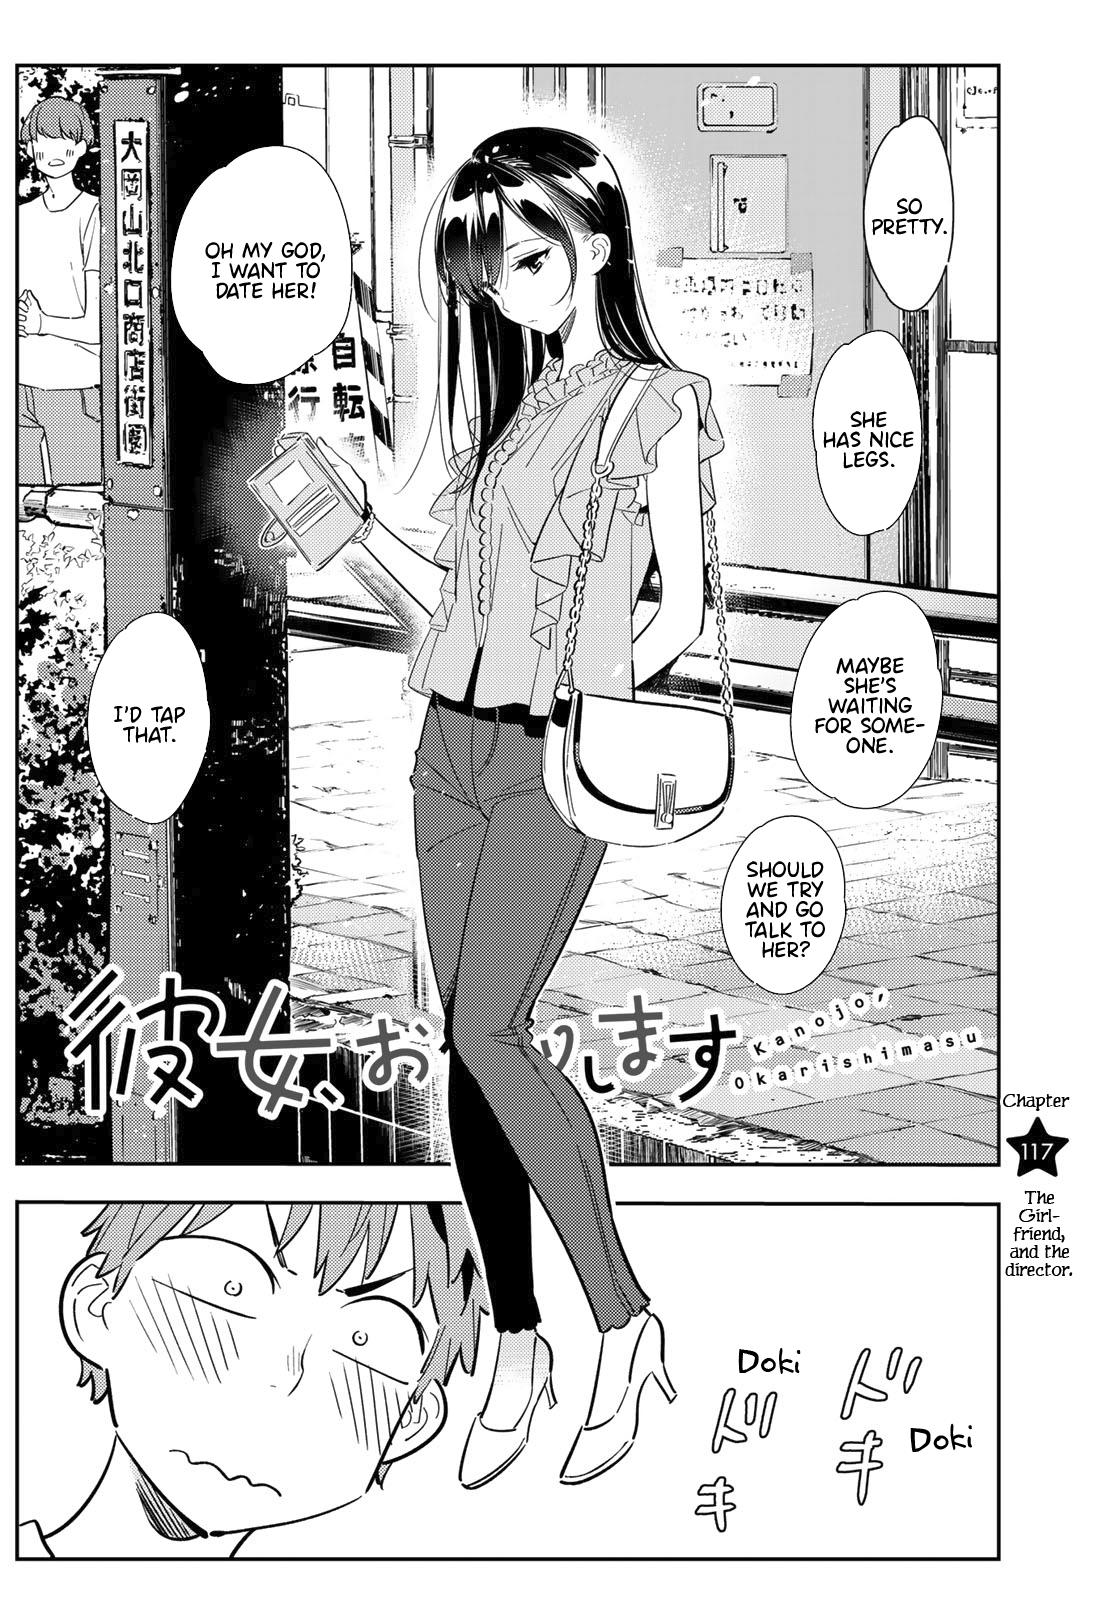 Rent A GirlFriend, Chapter 117 image 003